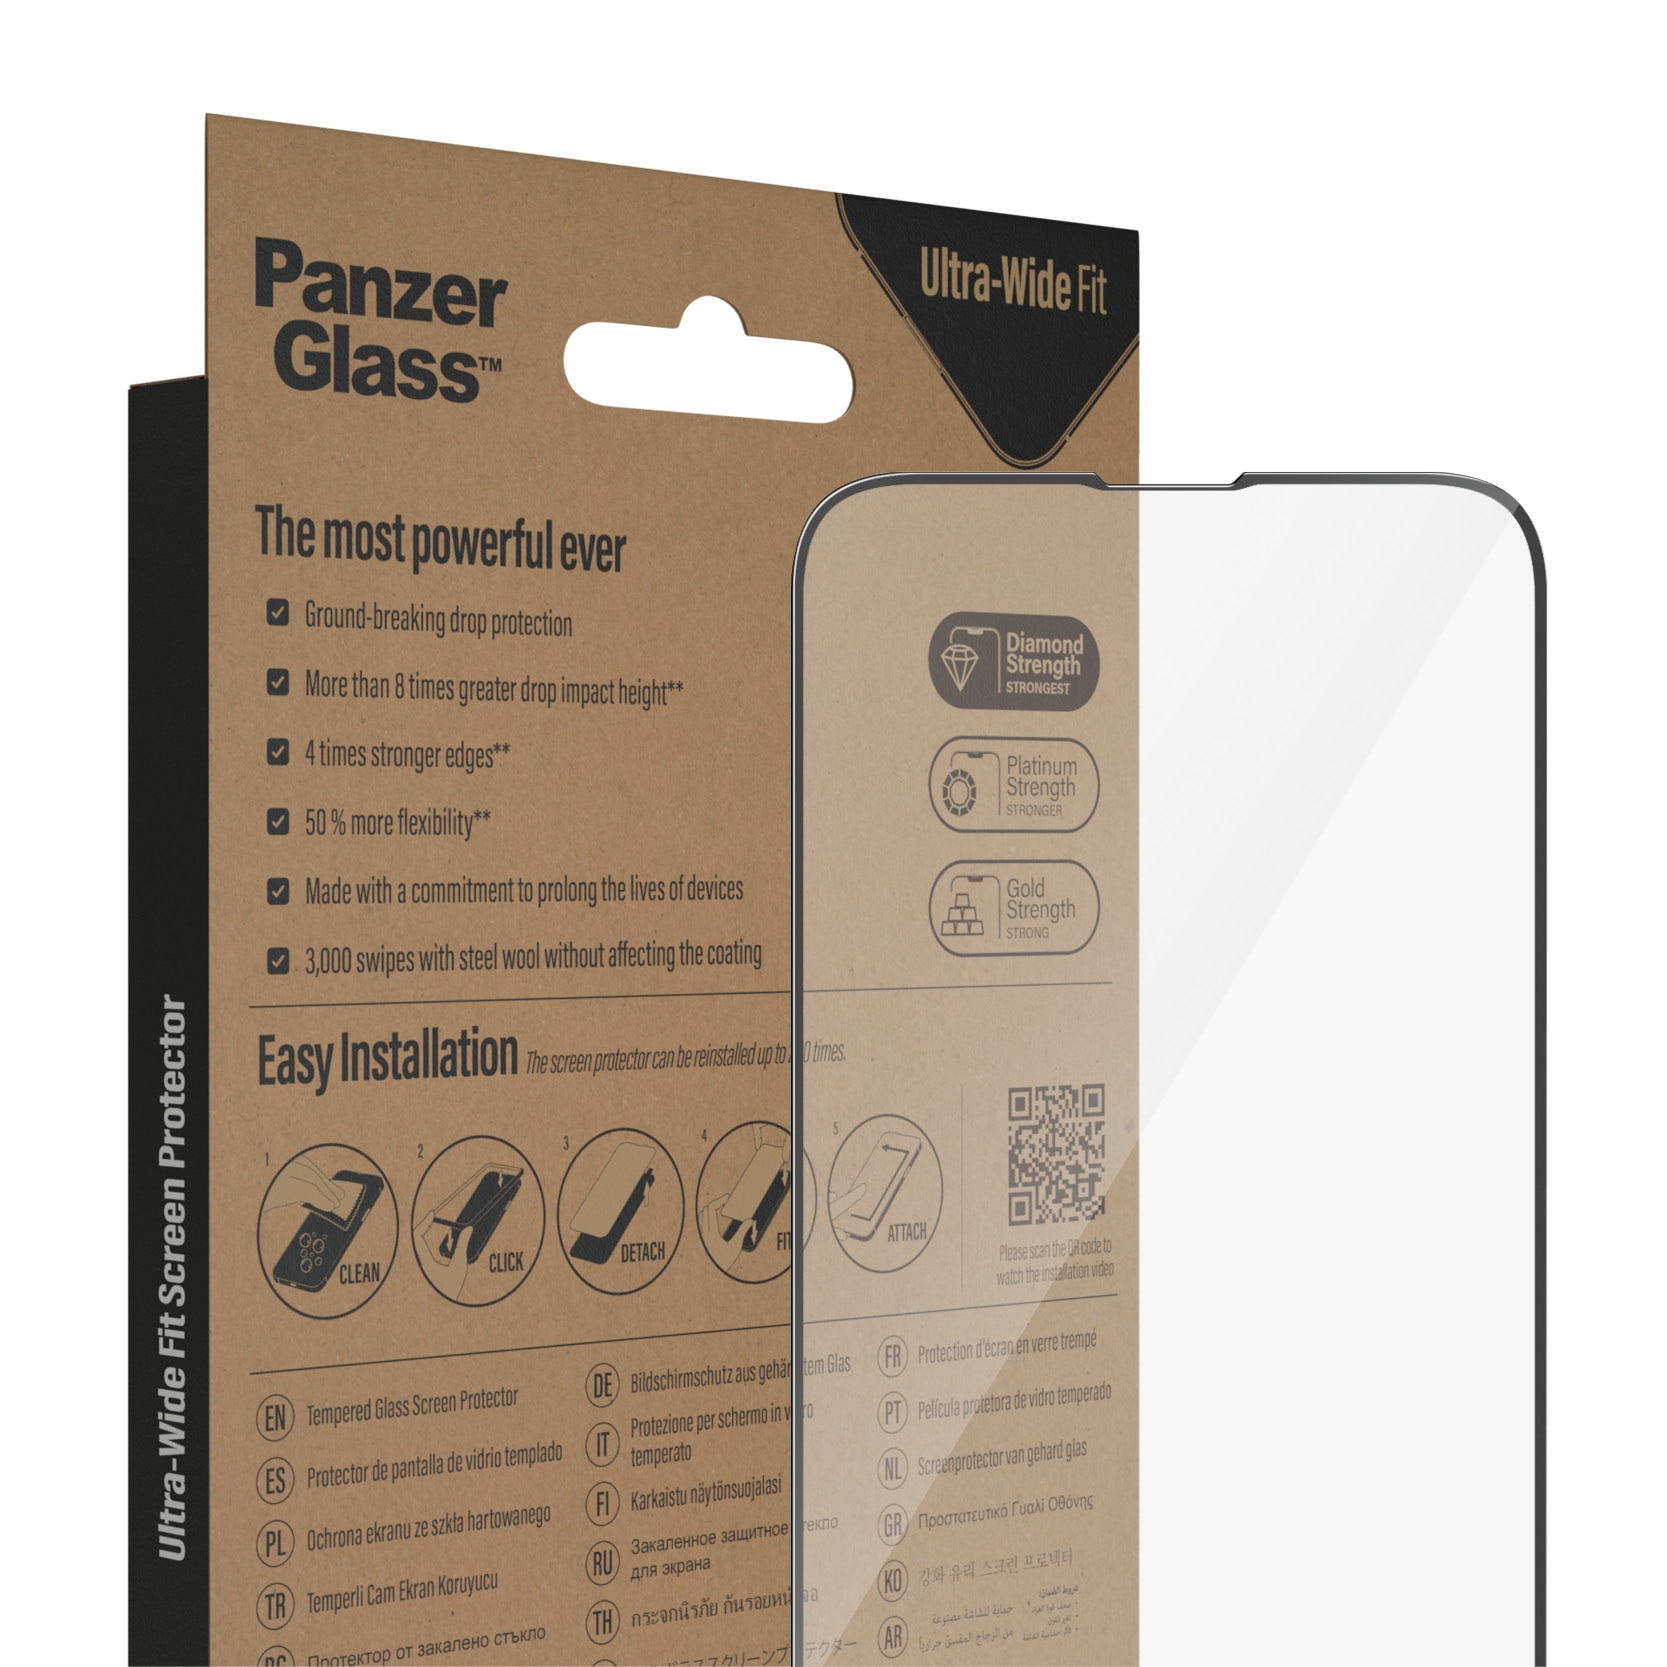 iPhone 13 Screen Protector (with EasyAligner) Ultra Wide Fit